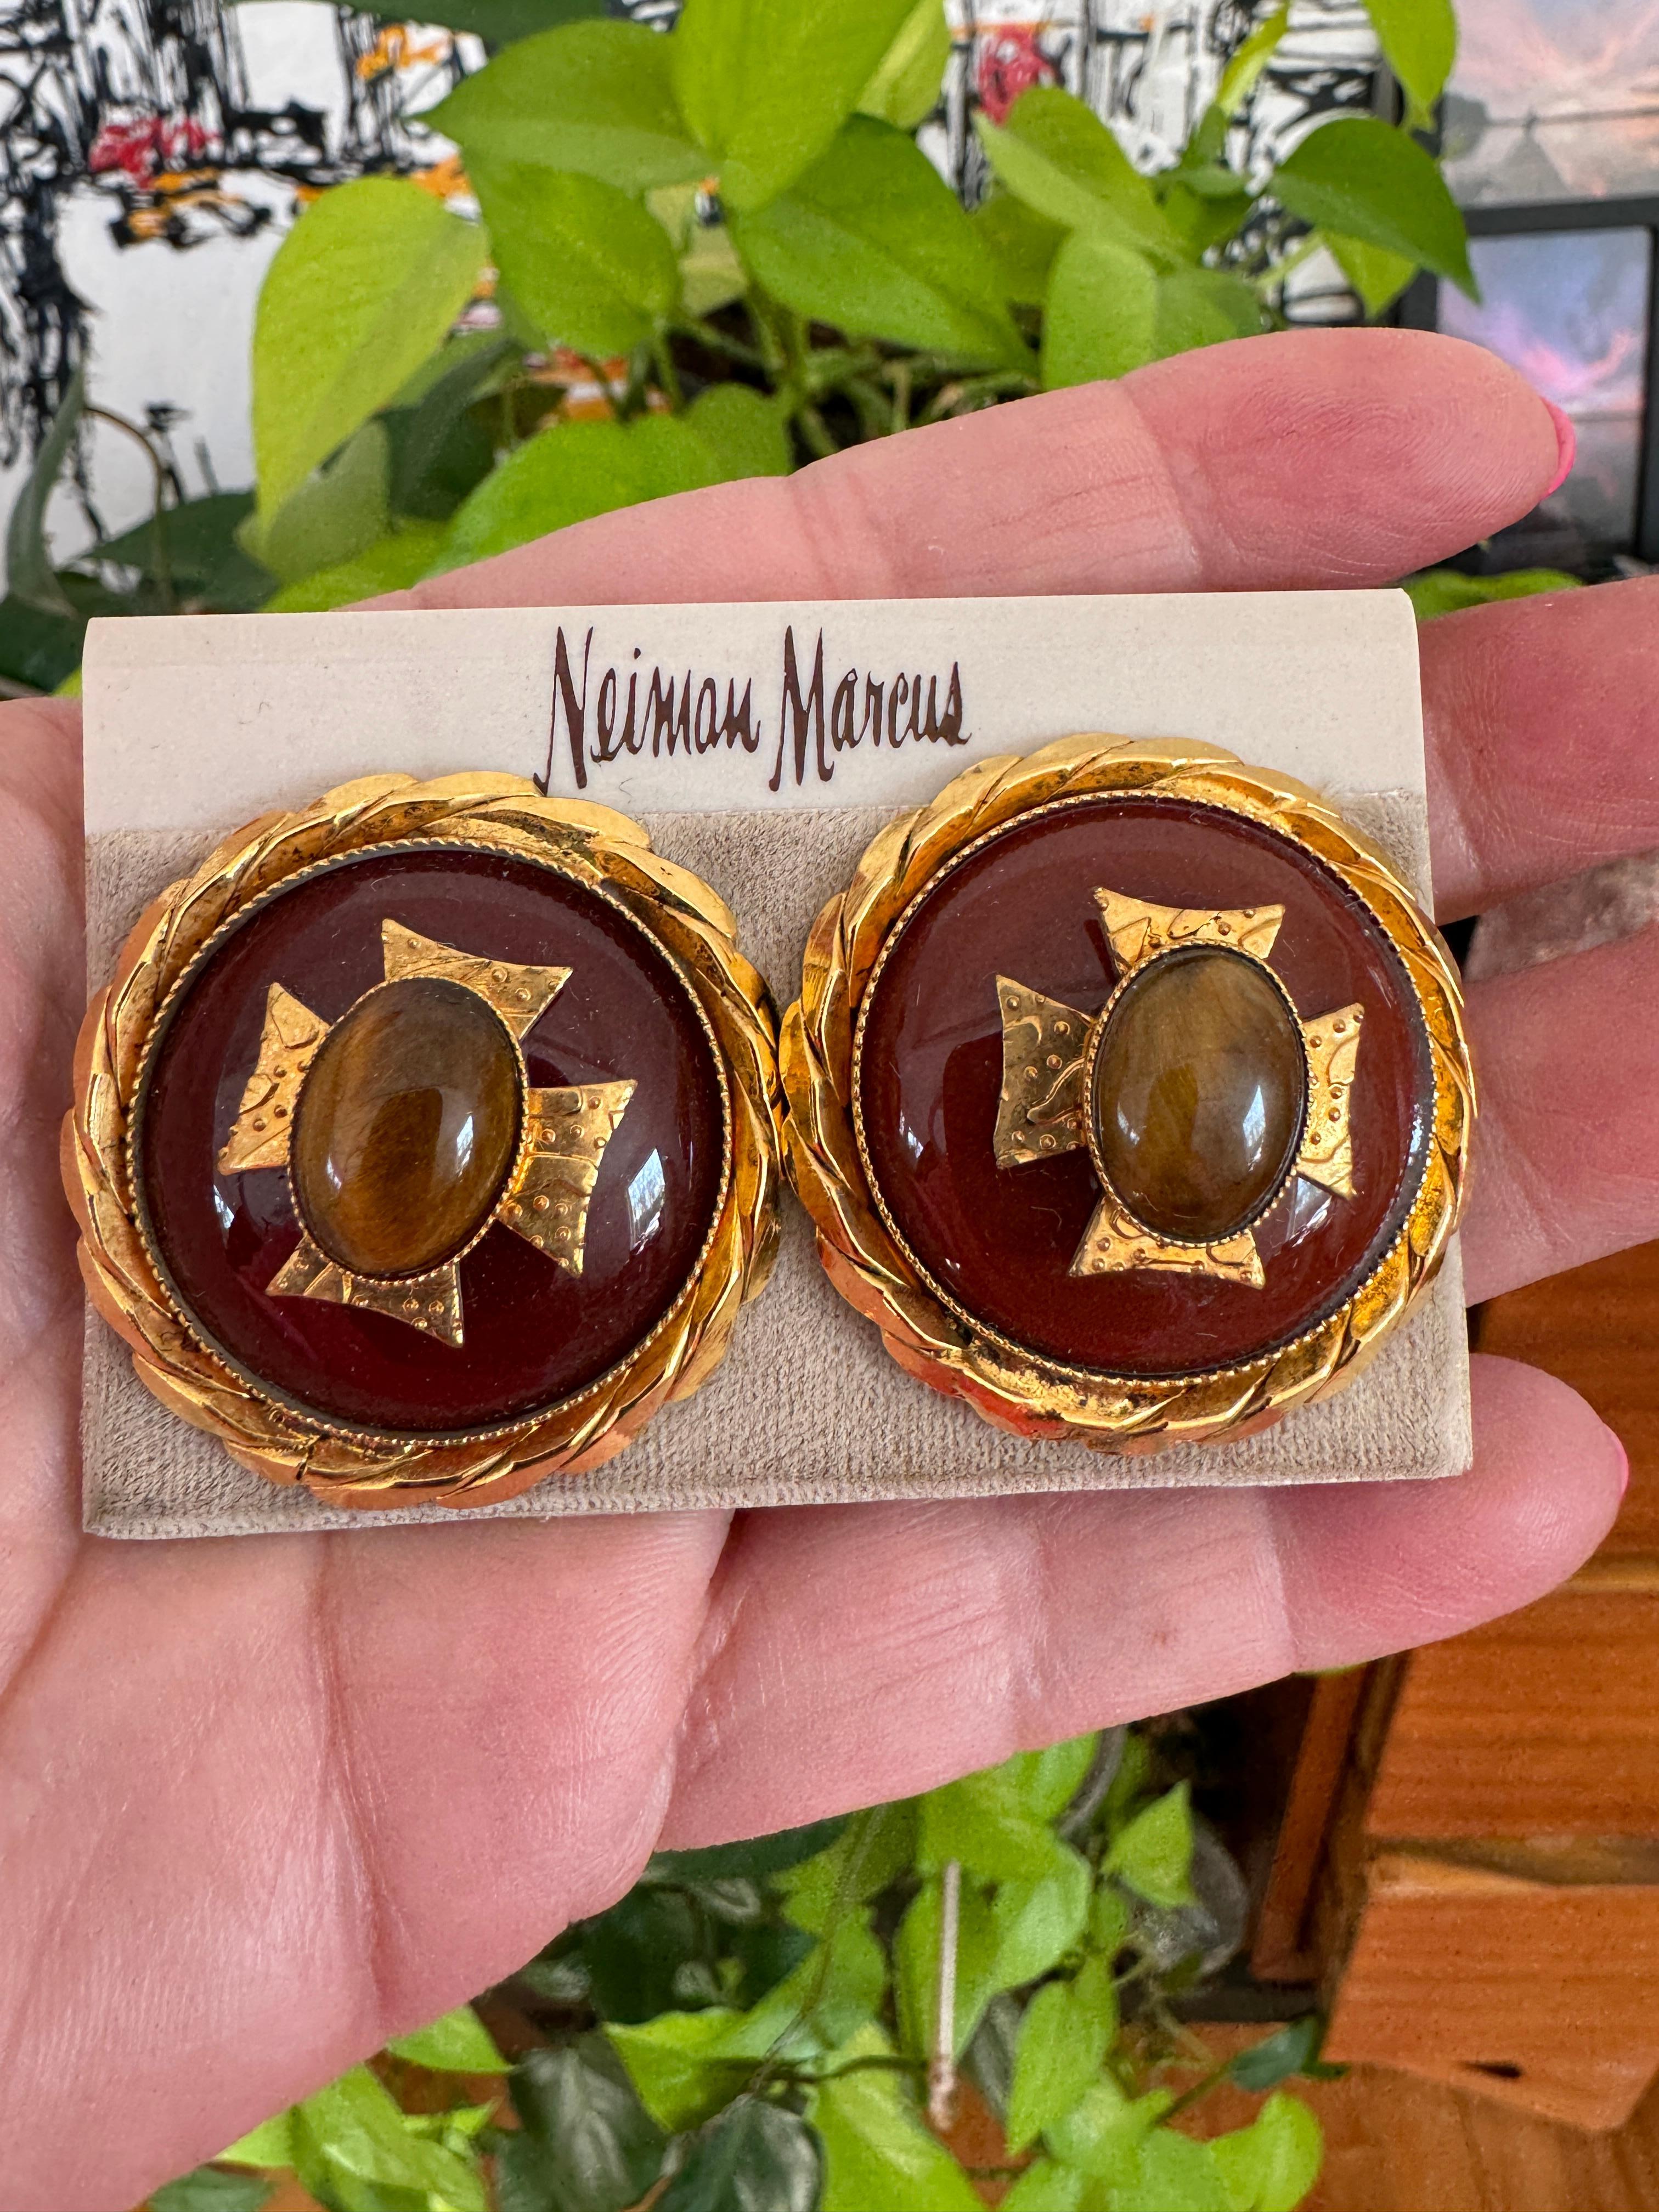 New Old Stock, never worn Phillipe Ferrandis Maltese Cross Clip on- Made in France. Bezel Set Tiger Eye Center with Gold gilt overlaid Cross then encased in a twisted Gilt gold. They are 1.50 in diameter. Still on the Neiman Marcus earring Card